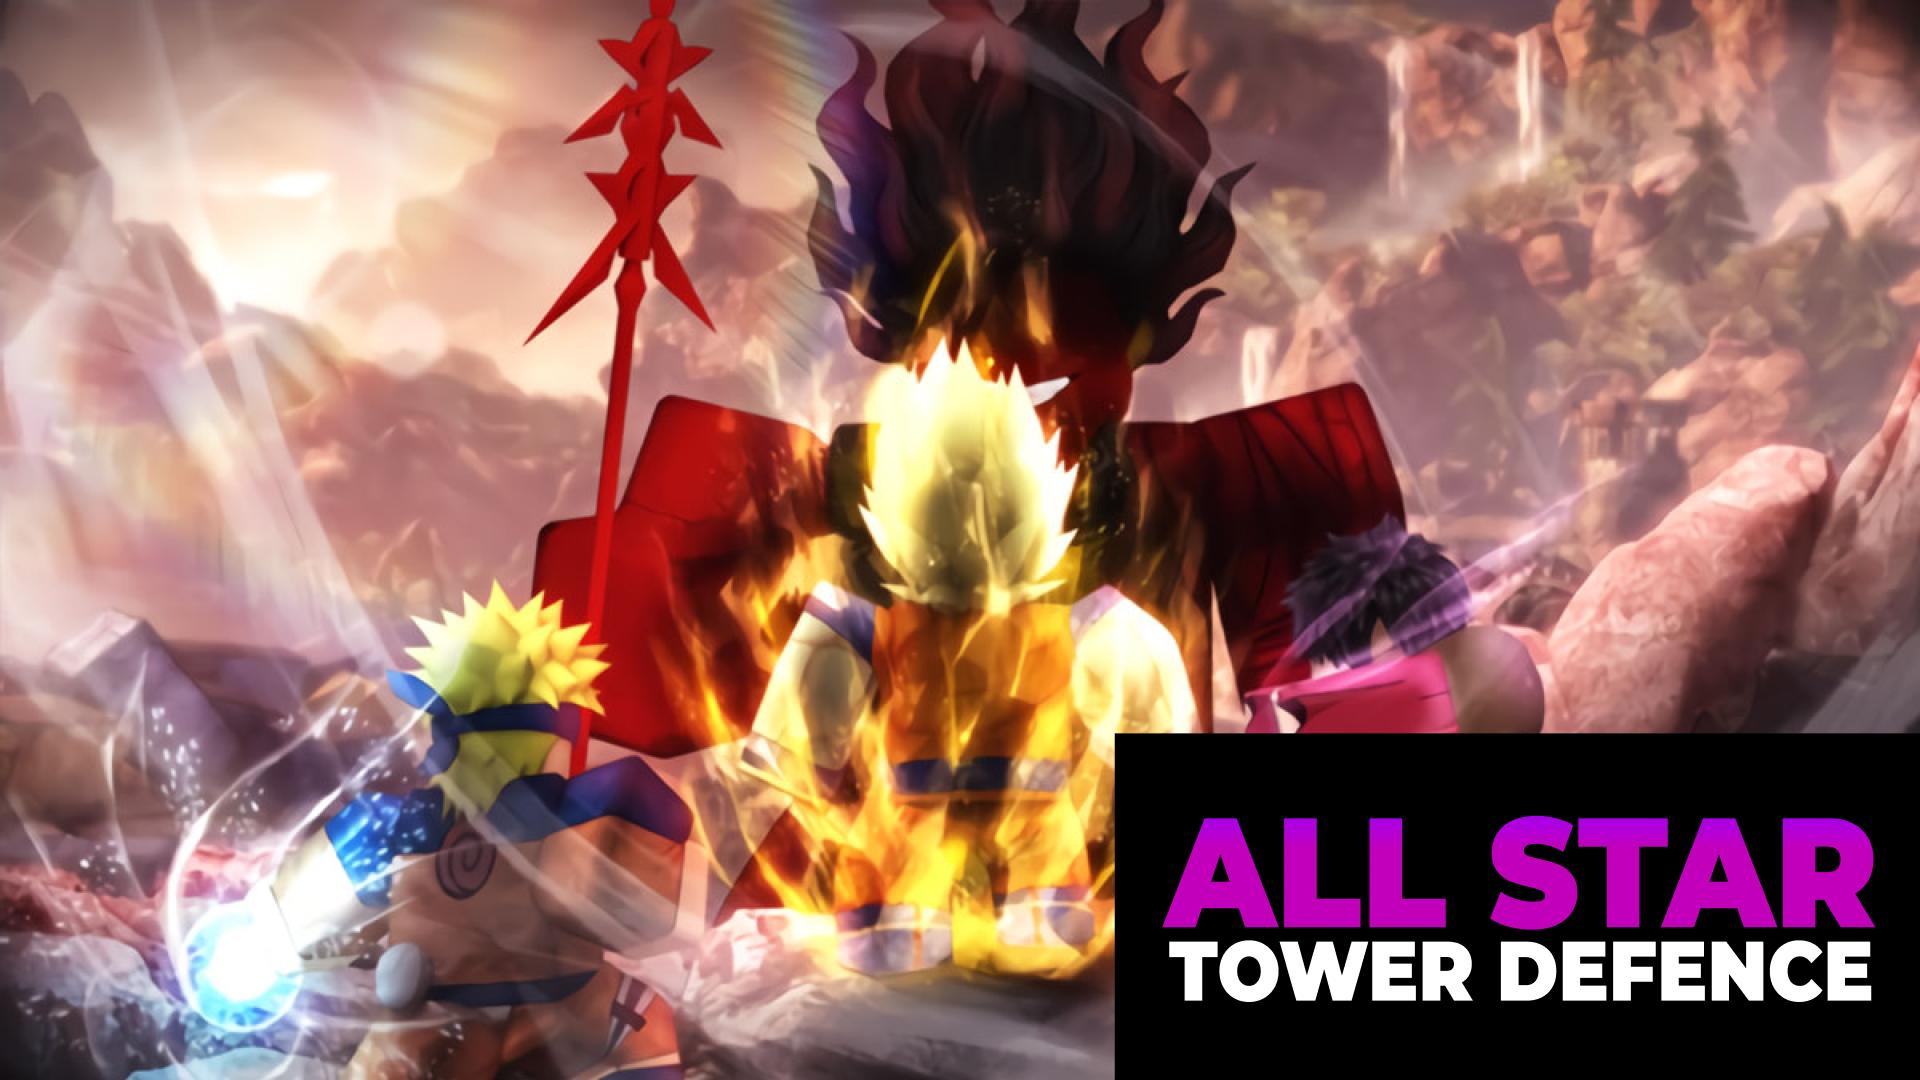 Roblox all star tower codes. All Star Tower Defense юниты\. All Star Tower Defense Roblox. Коды в all Star Tower Defense. Алл Стар ТОВЕР дефенс РОБЛОКС.